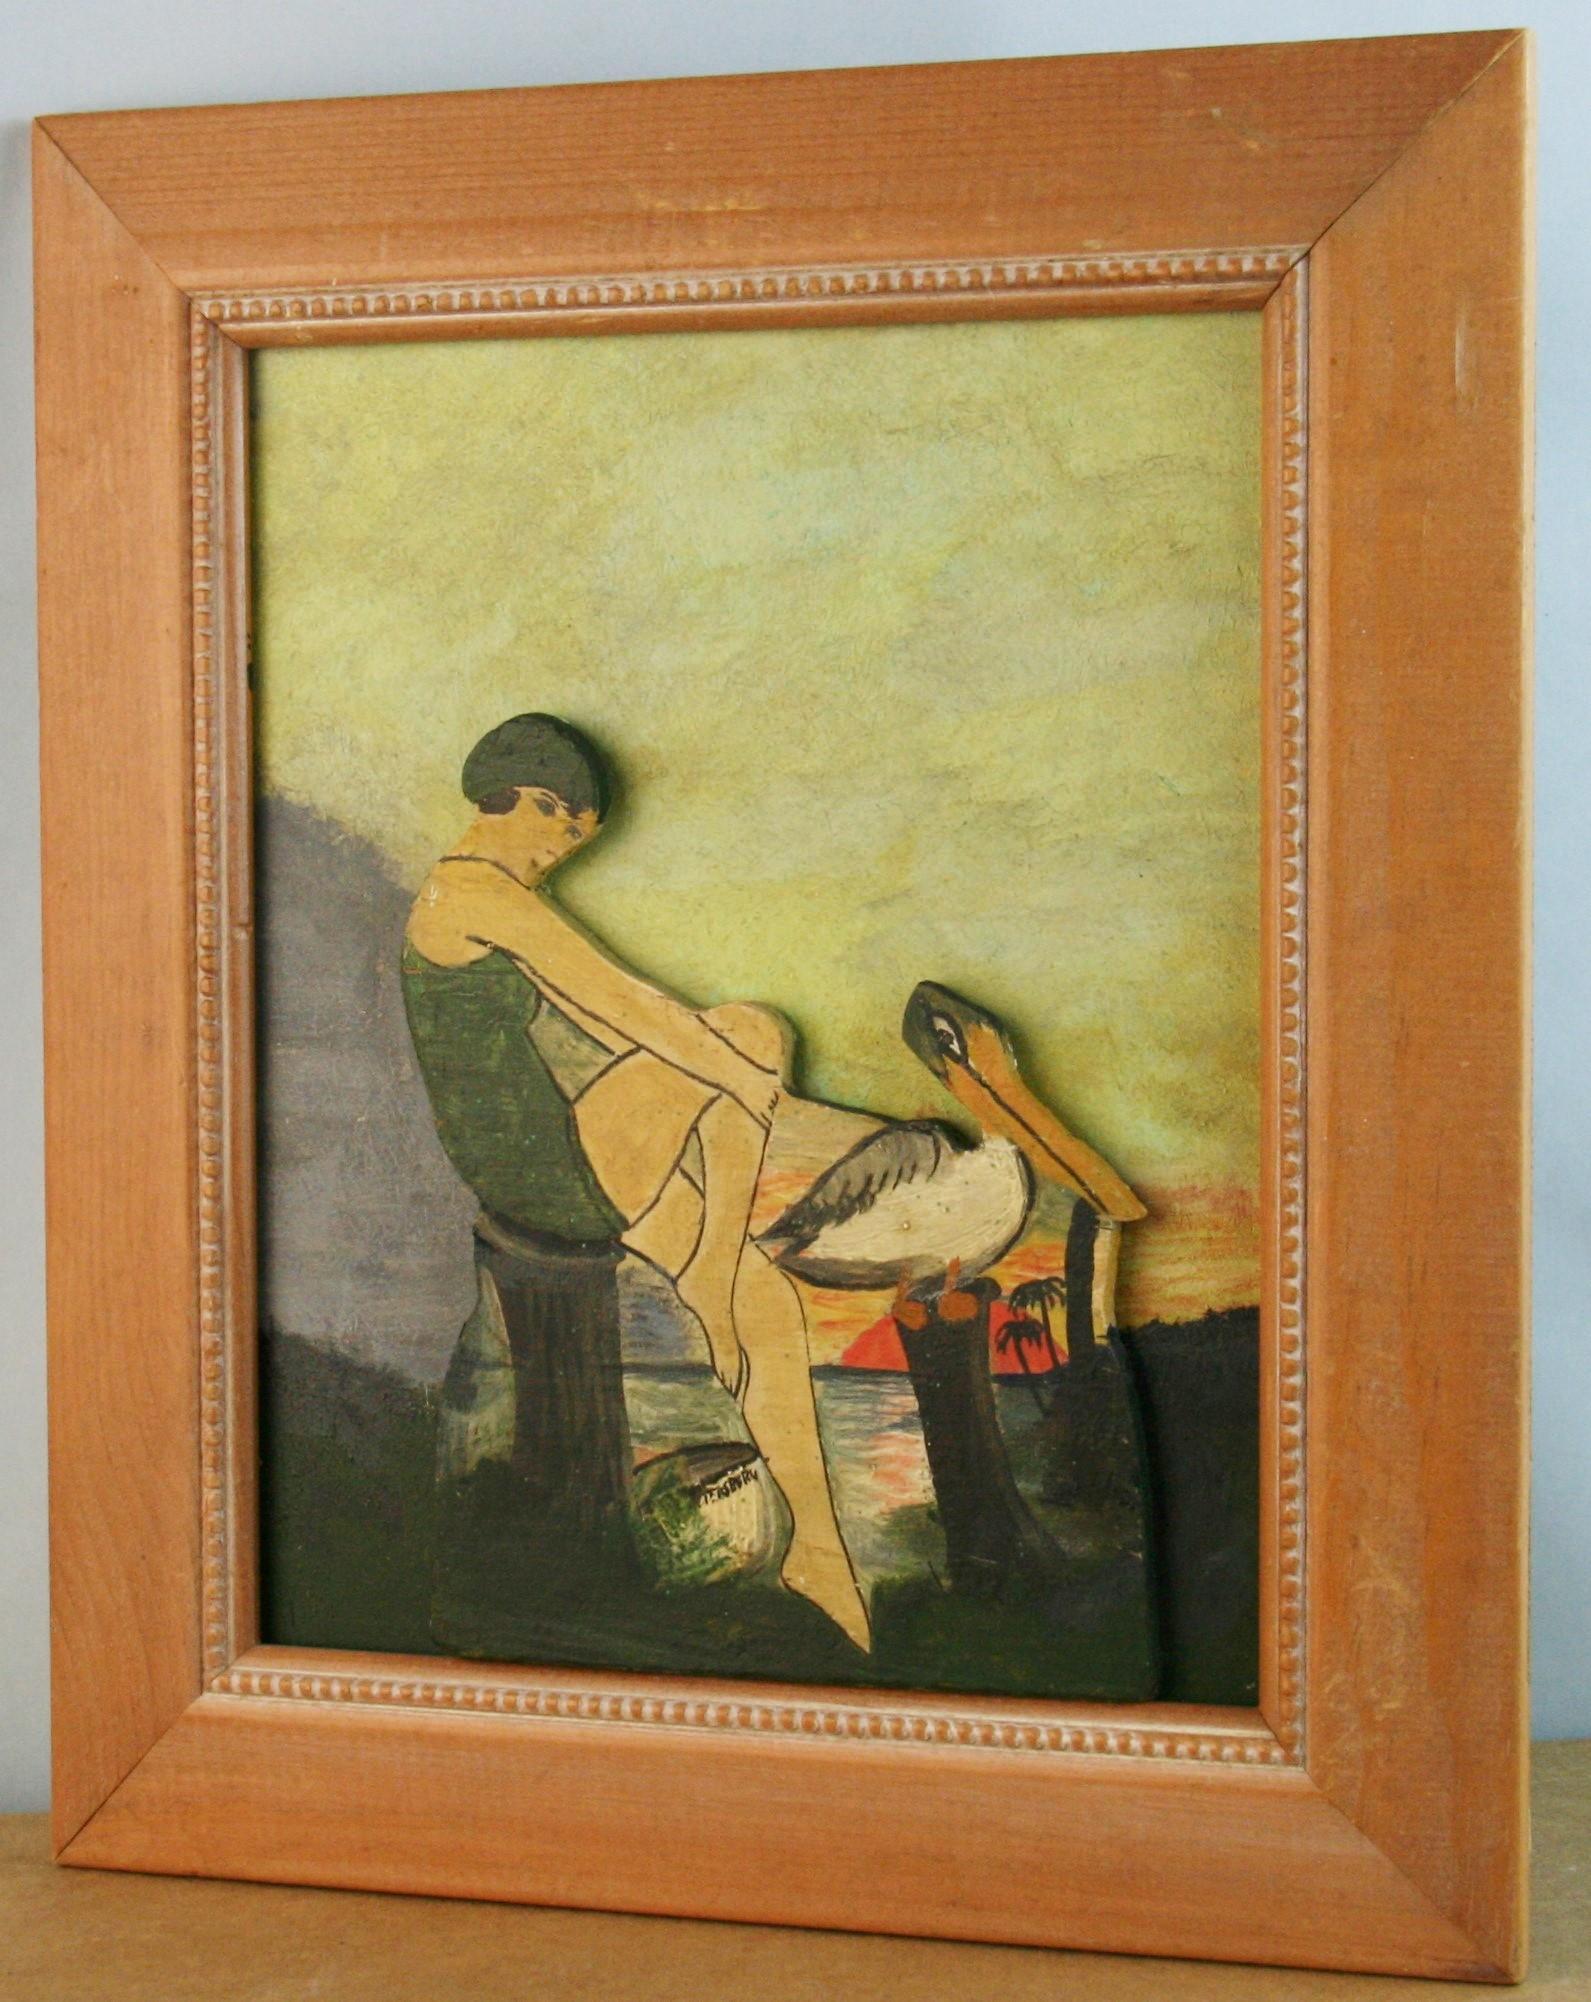 4032 Scandinavian painting of a  female bather on cut out wood applied to a painted backround
Set in a wood frame image size 8.5x10.5